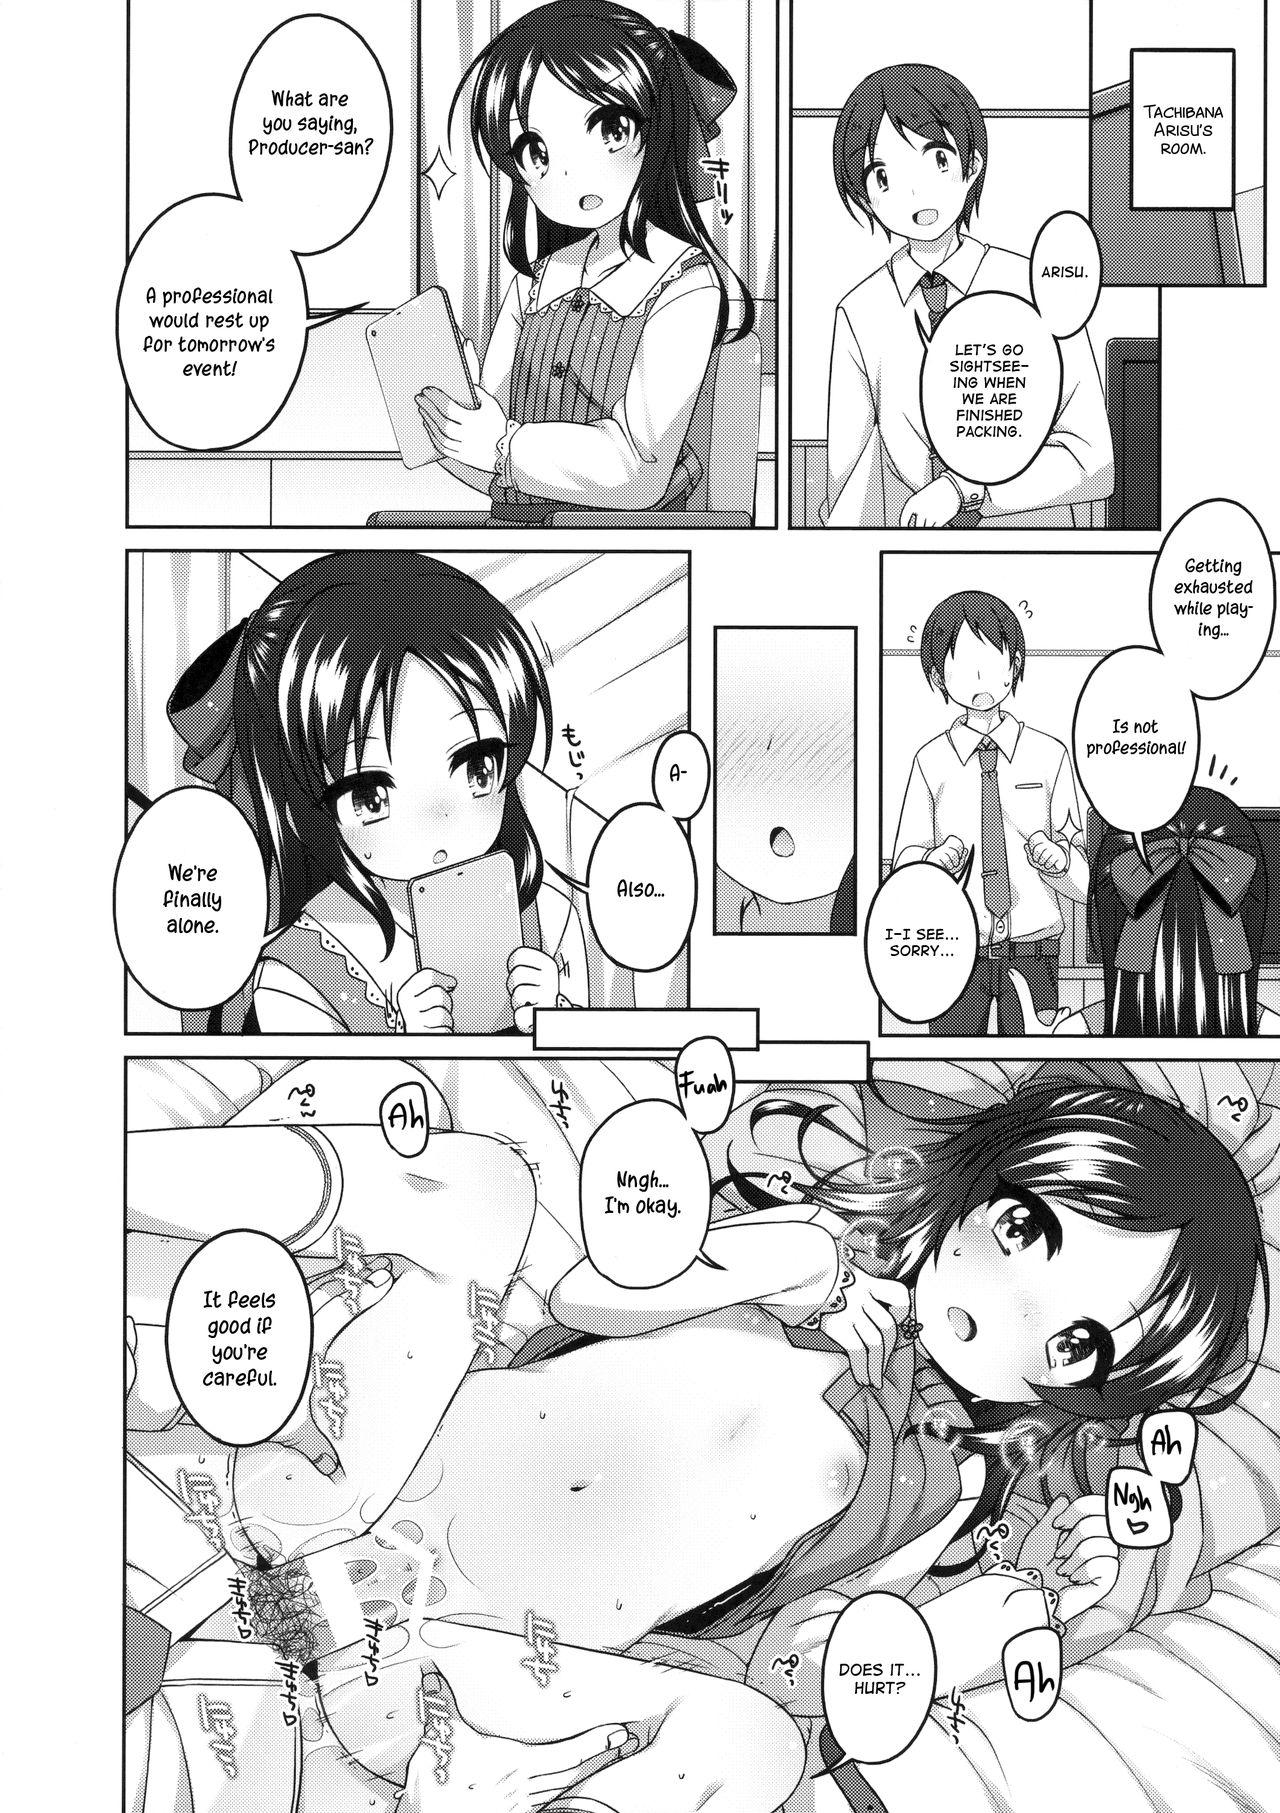 Panty Live no Mae no Hi wa | The day before the concert - The idolmaster Milk - Page 11